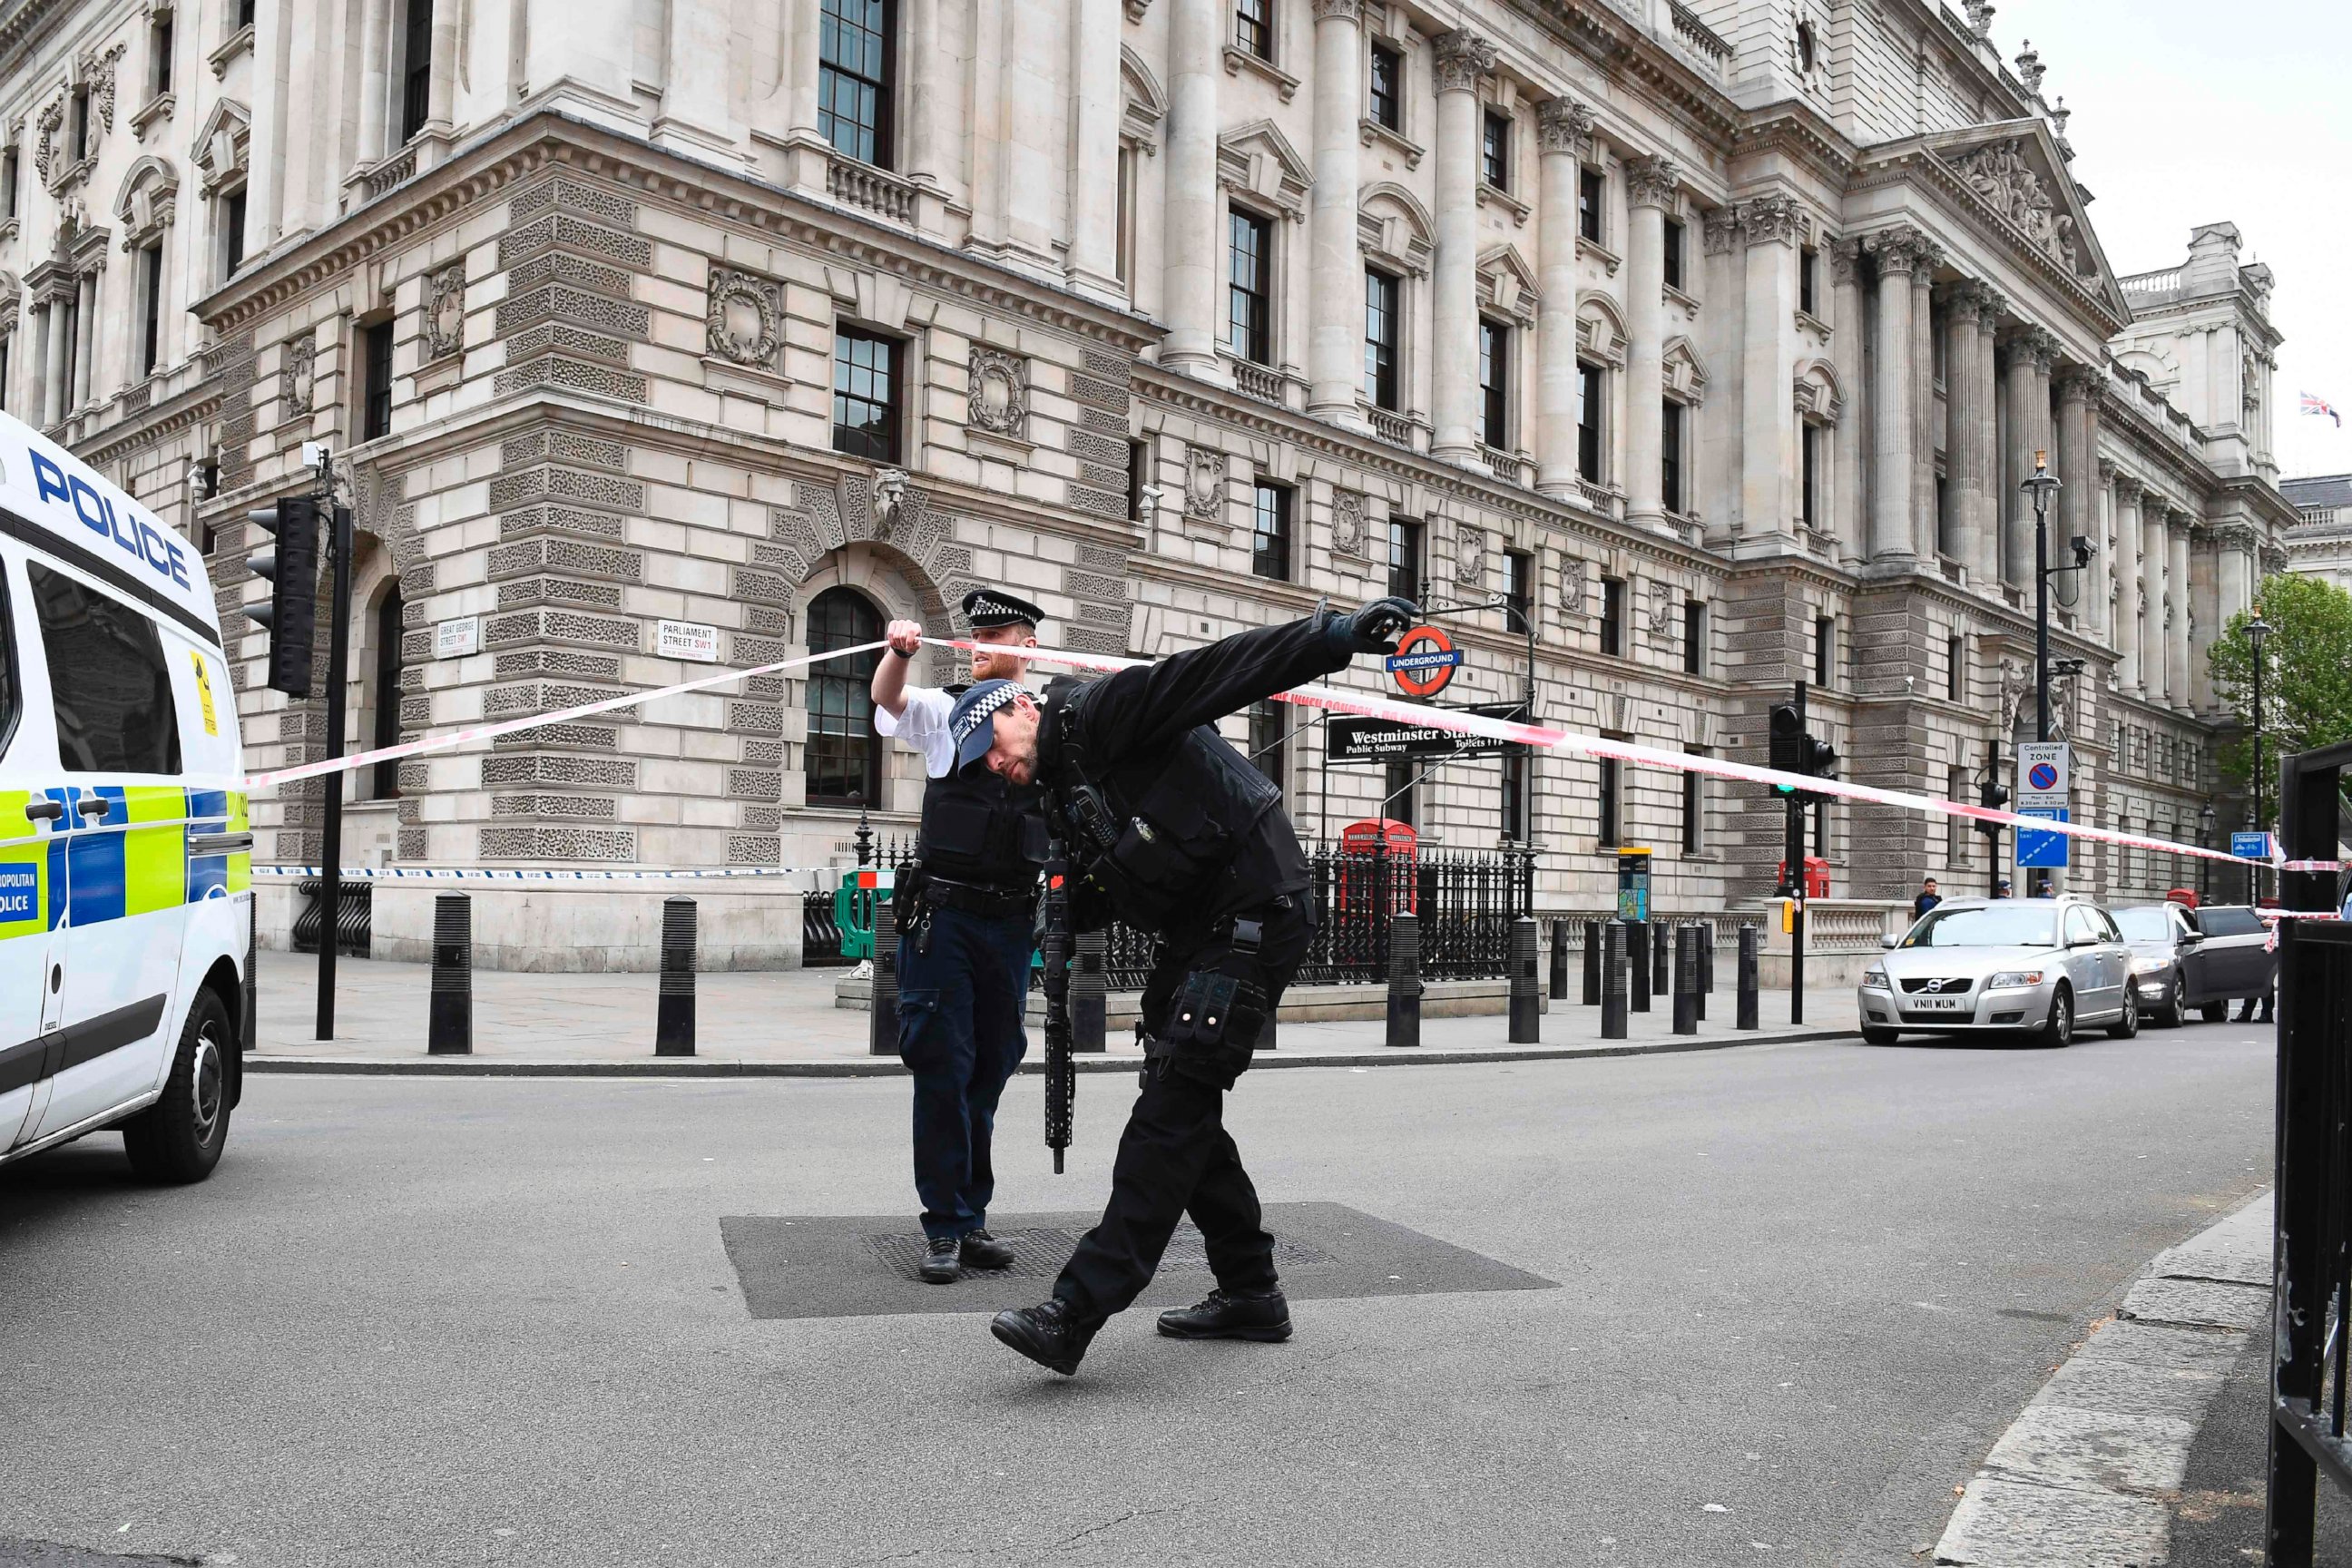 PHOTO: British police officers secure a cordon near the scene on Whitehall near the Houses of Parliament in central London on April 27, 2017 where a man was detained before being taken away by police.